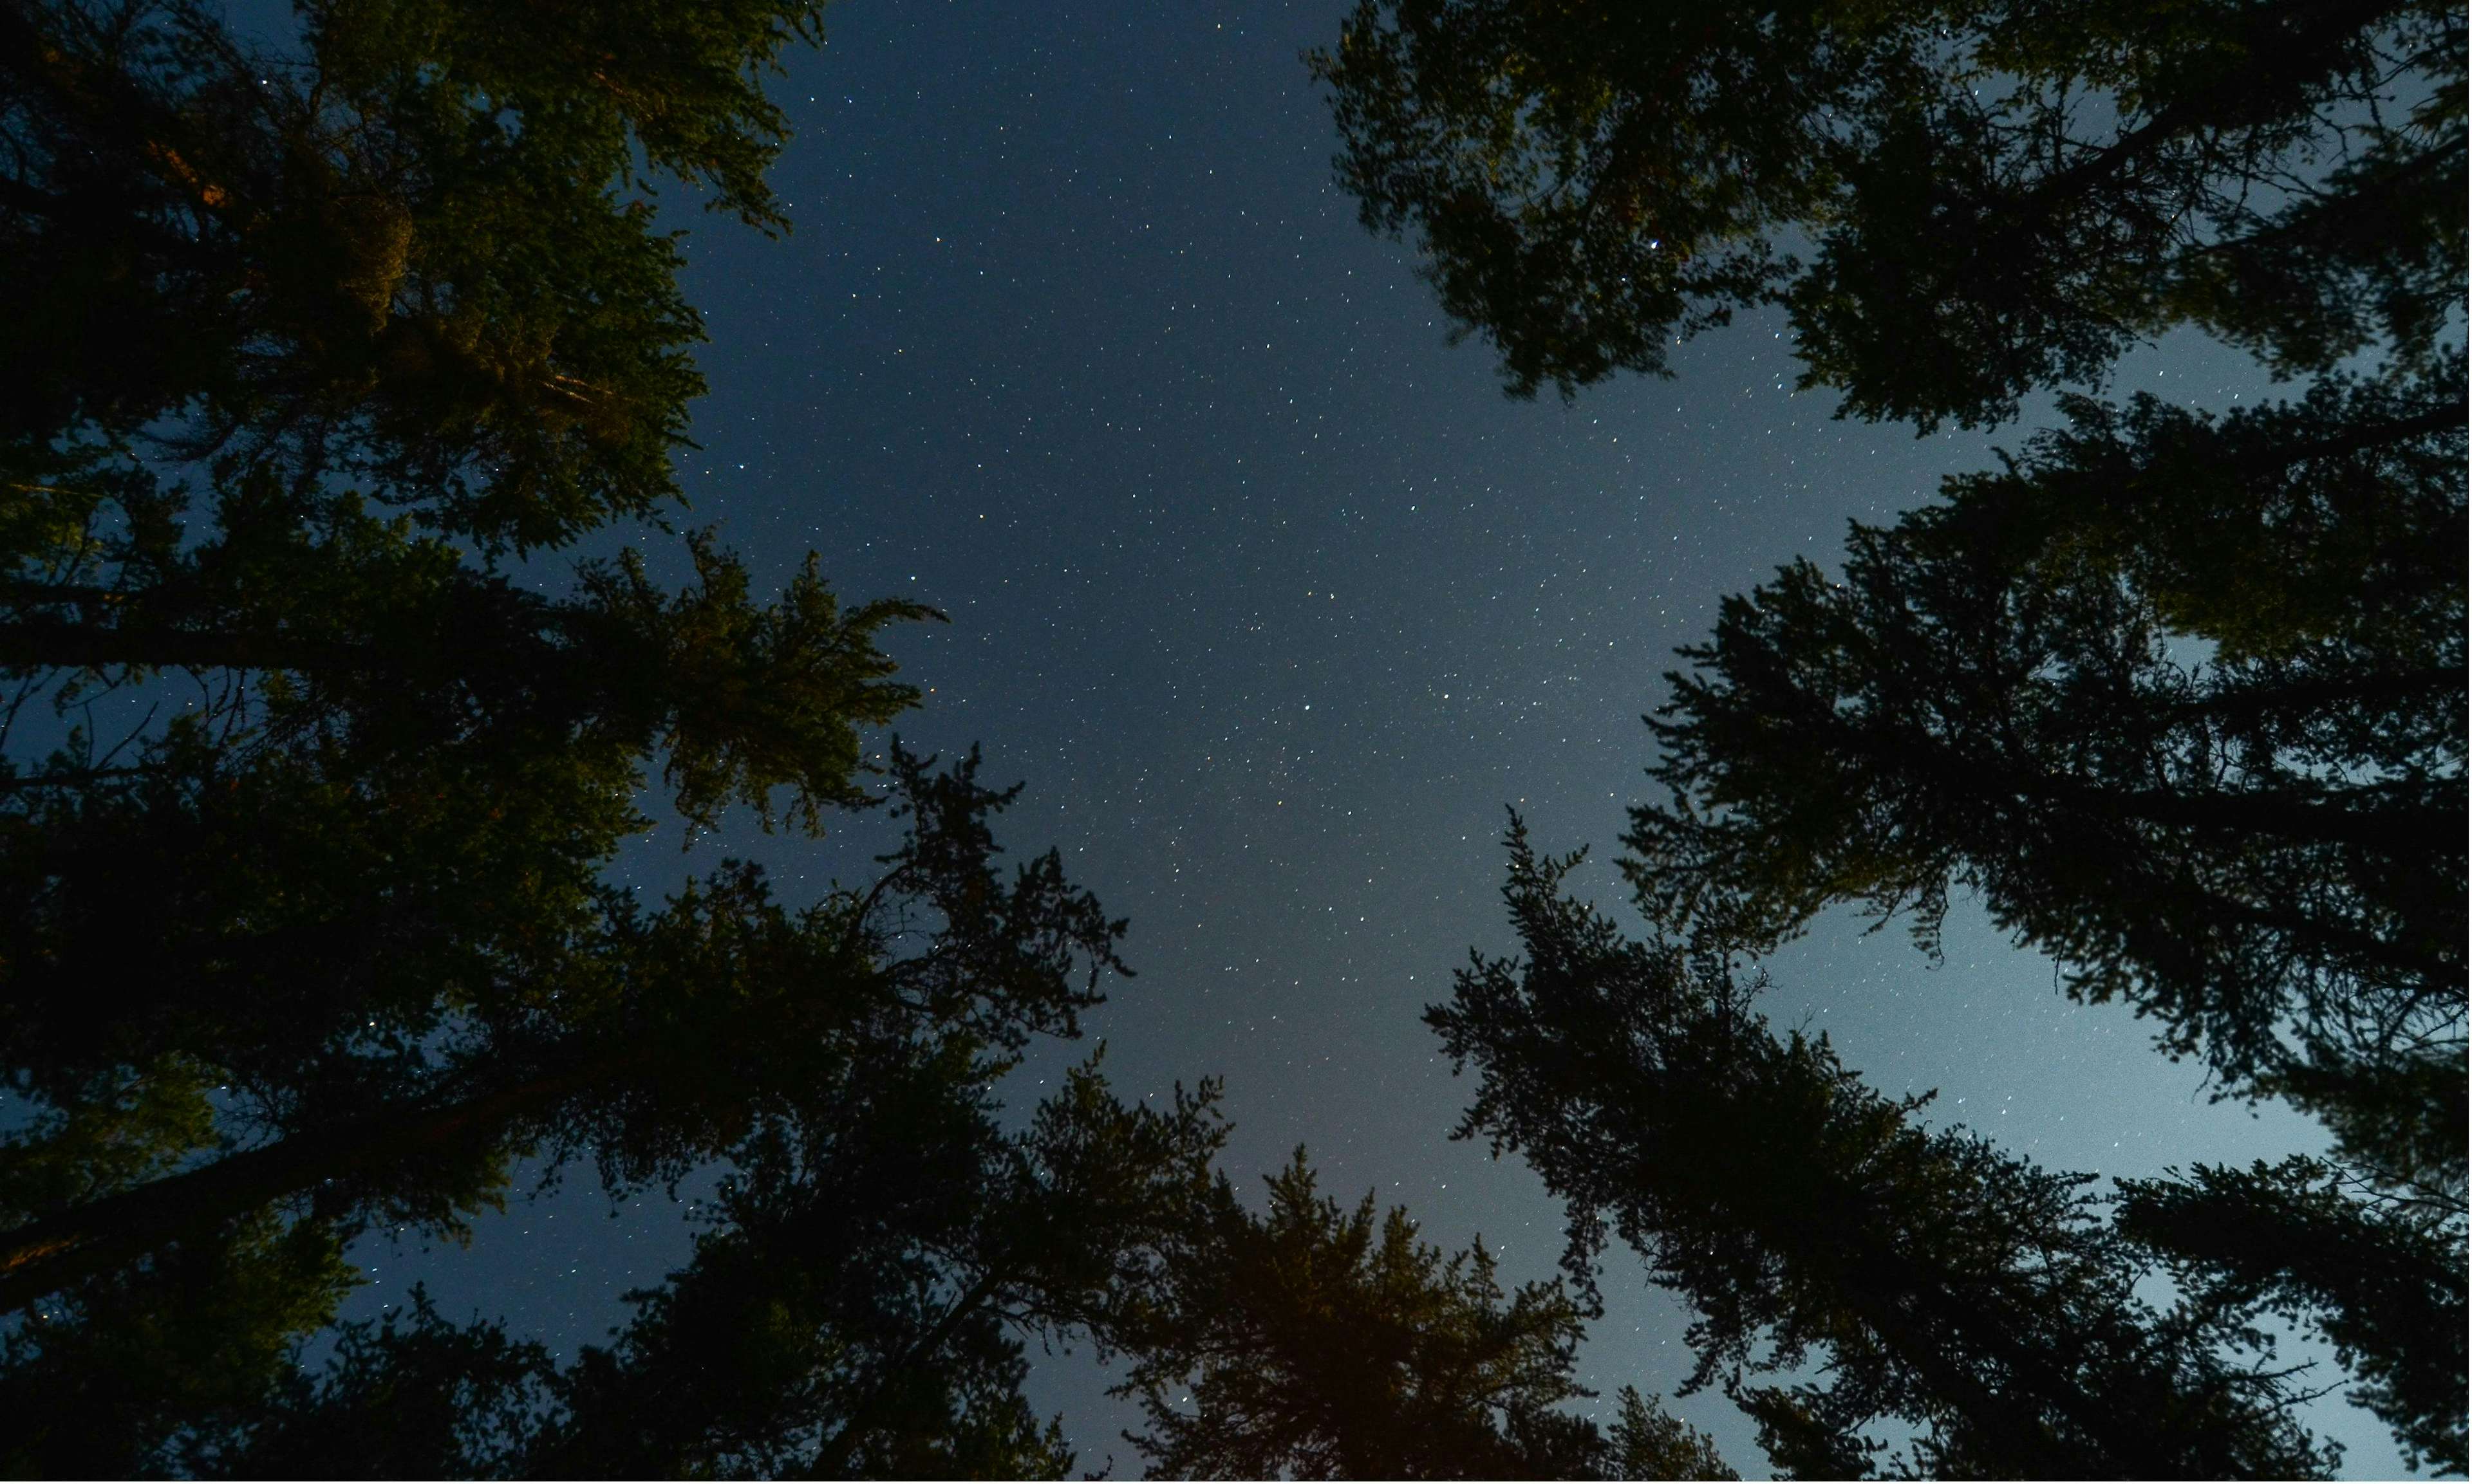 view of the stars at night from underneath evergreen trees